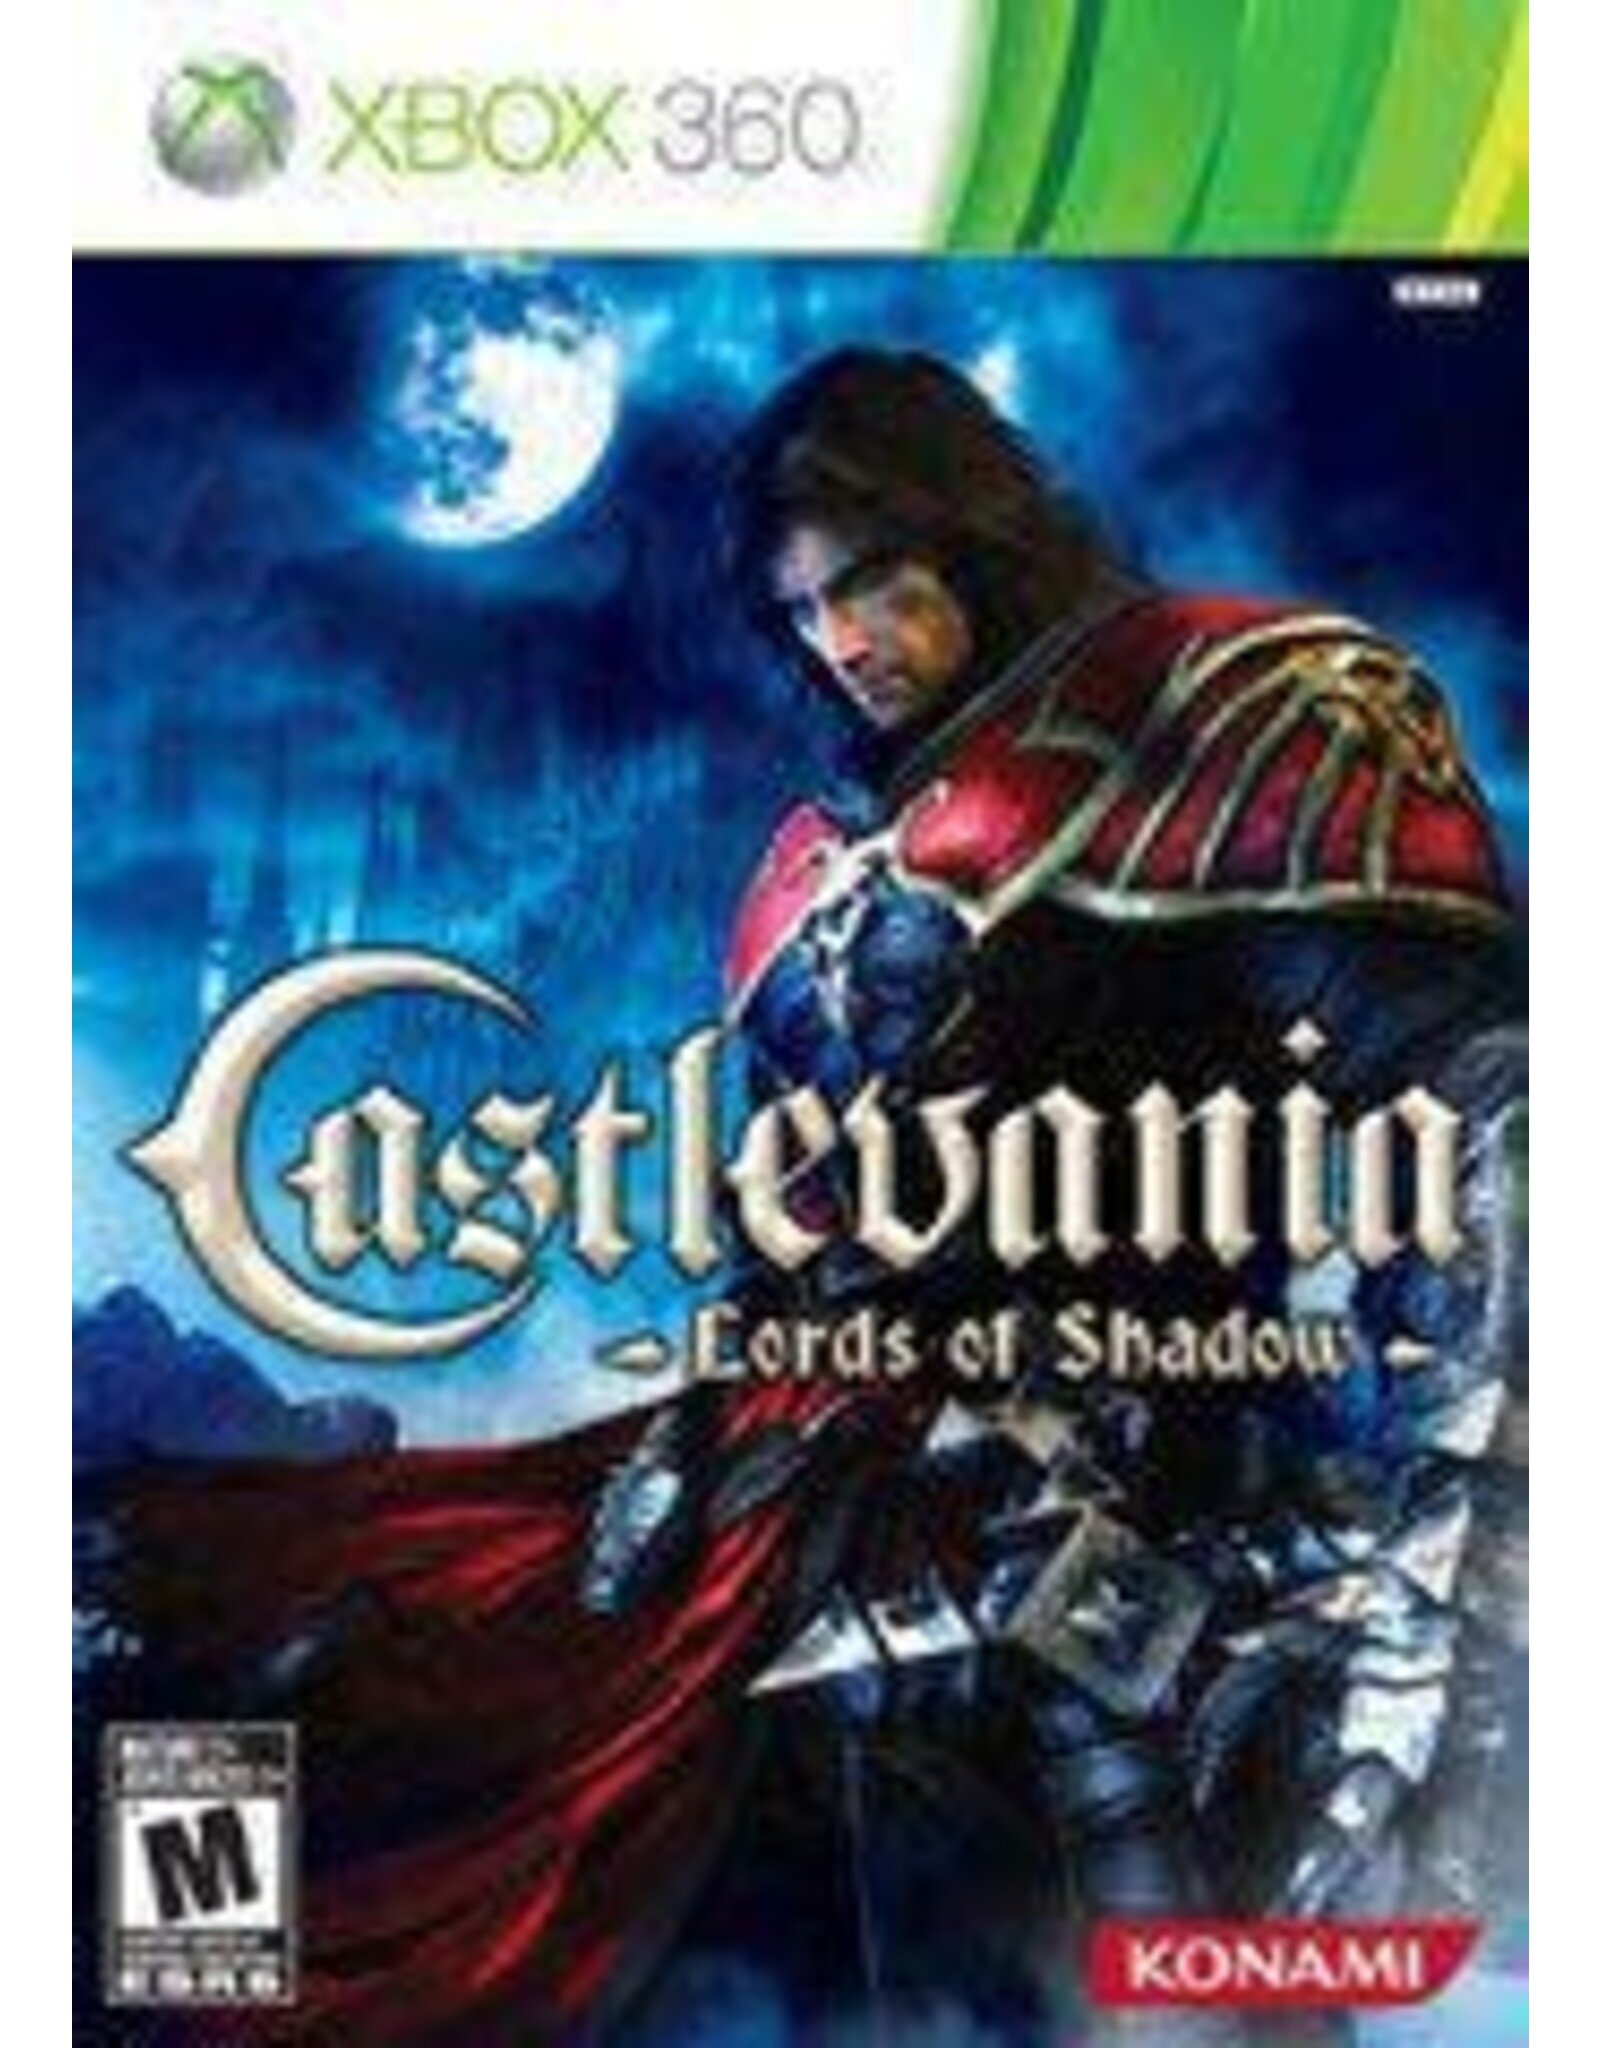 Xbox 360 Castlevania: Lords of Shadow (Used)